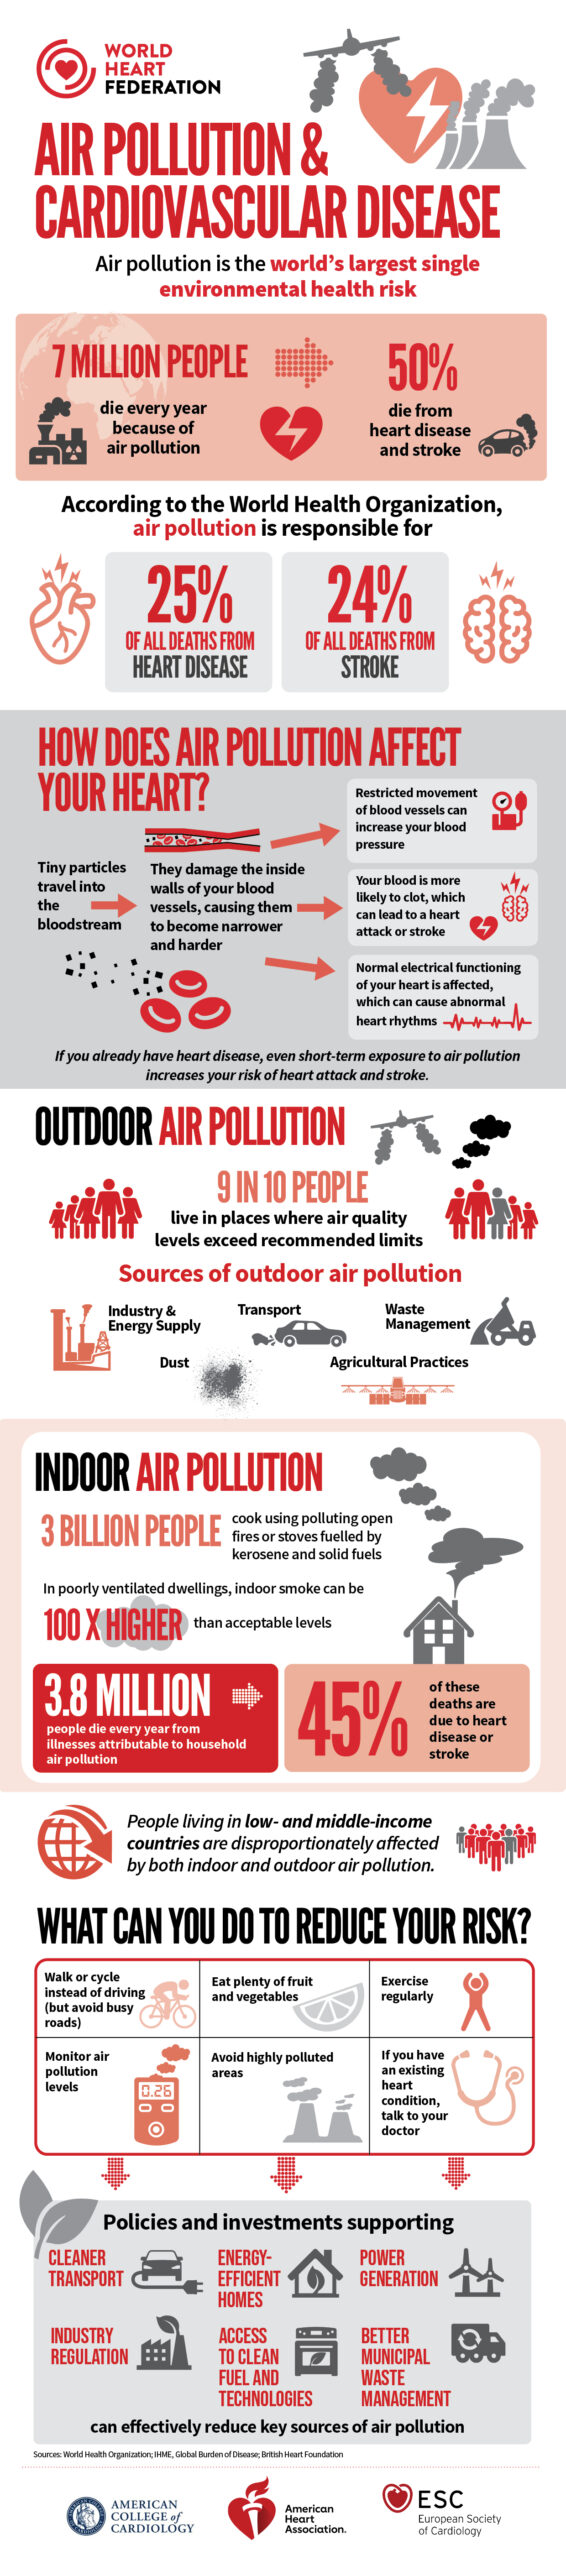 Infographic World Heart Federation 5465